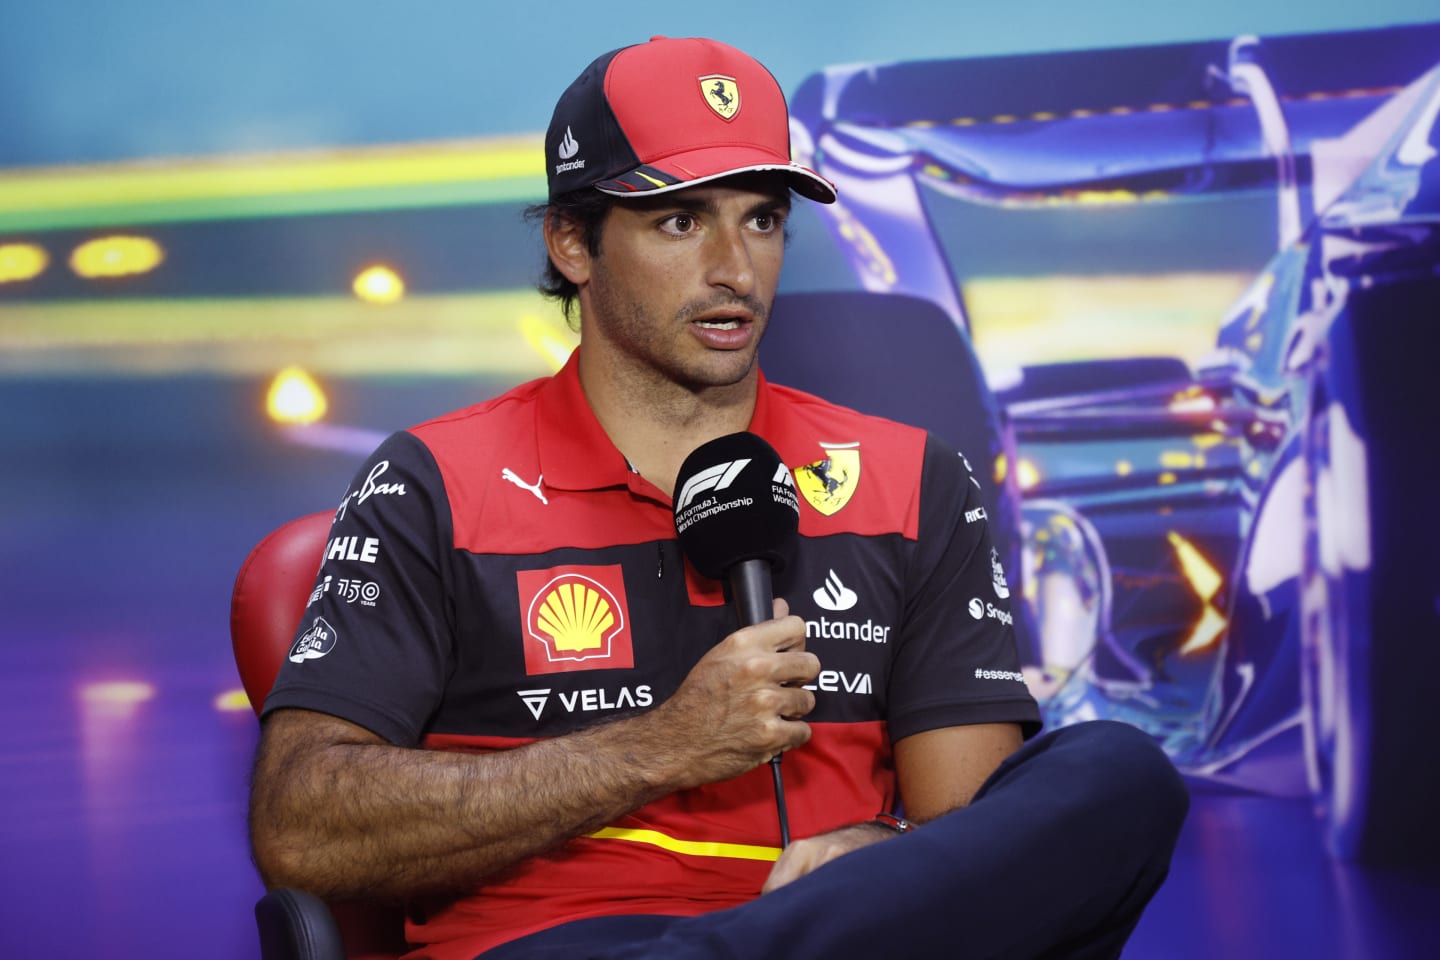 SAO PAULO, BRAZIL - NOVEMBER 10: Carlos Sainz of Spain and Ferrari attends the Drivers Press Conference during previews ahead of the F1 Grand Prix of Brazil at Autodromo Jose Carlos Pace on November 10, 2022 in Sao Paulo, Brazil. (Photo by Jared C. Tilton/Getty Images)